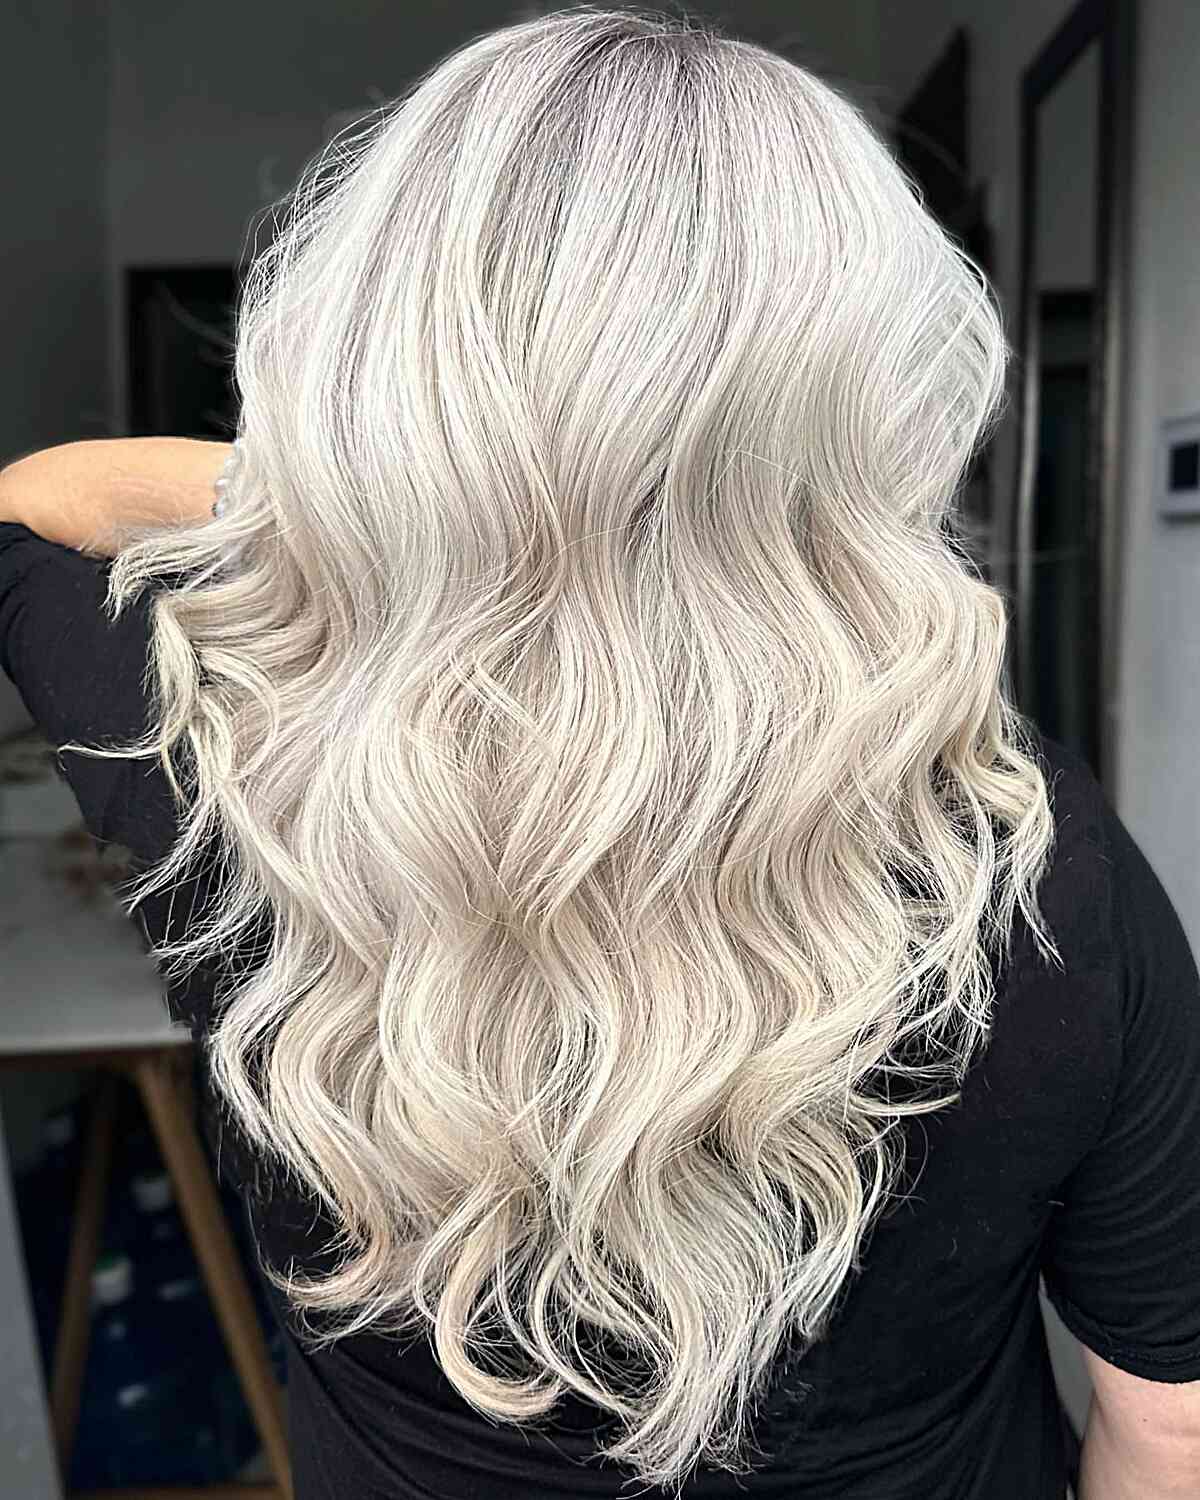 Top more than 75 icy blonde hair super hot